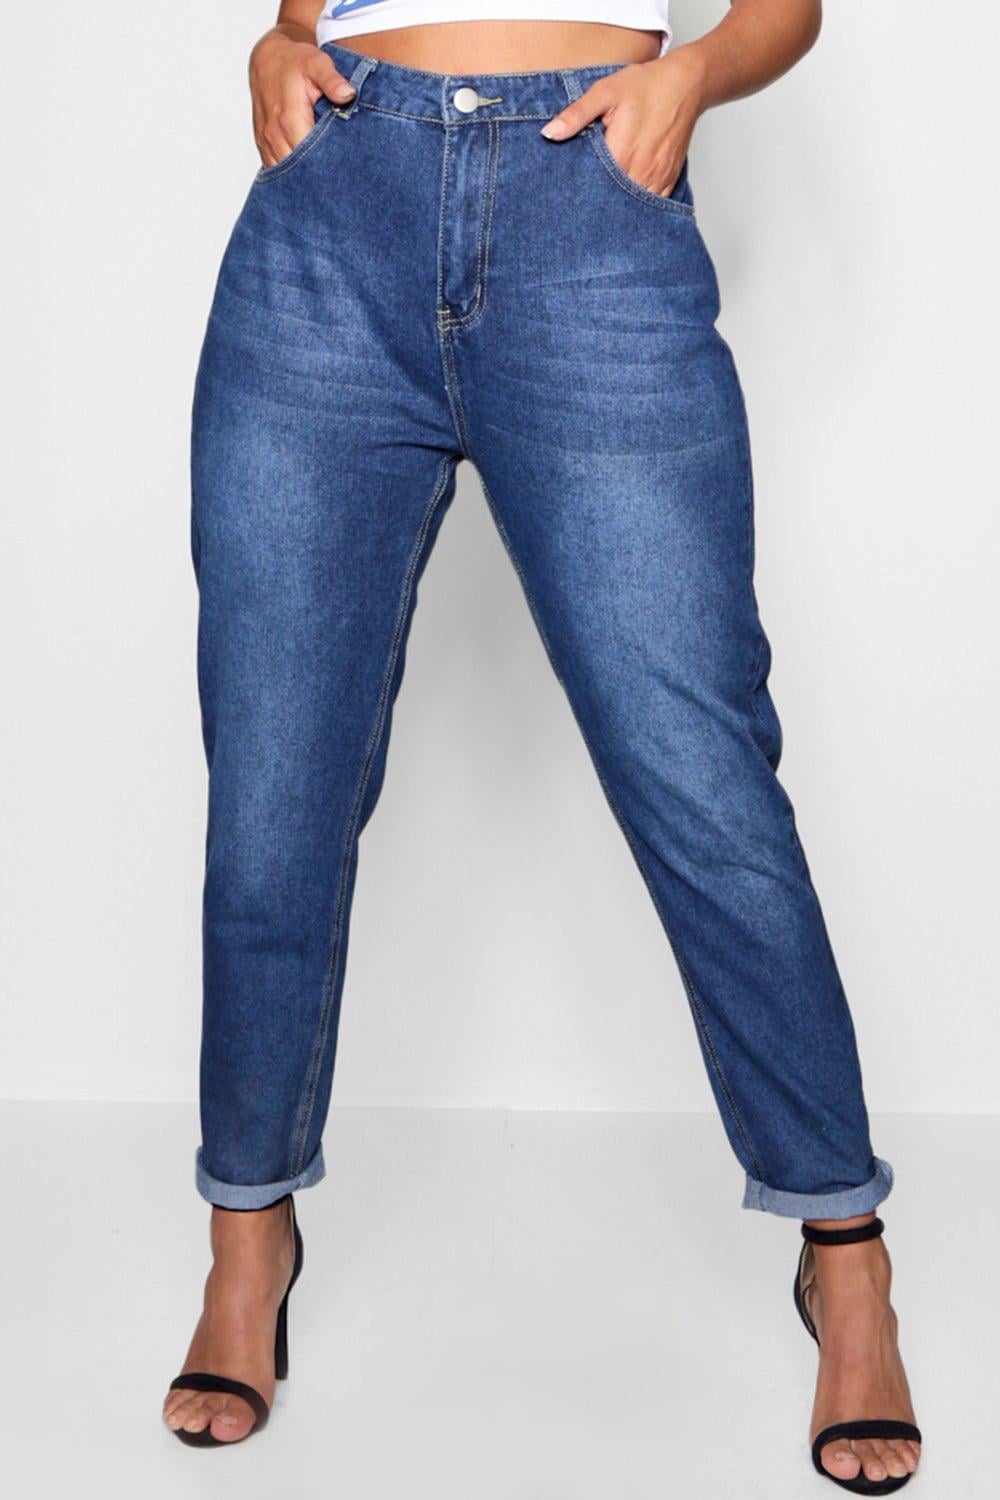 blue jeans for curvy figures